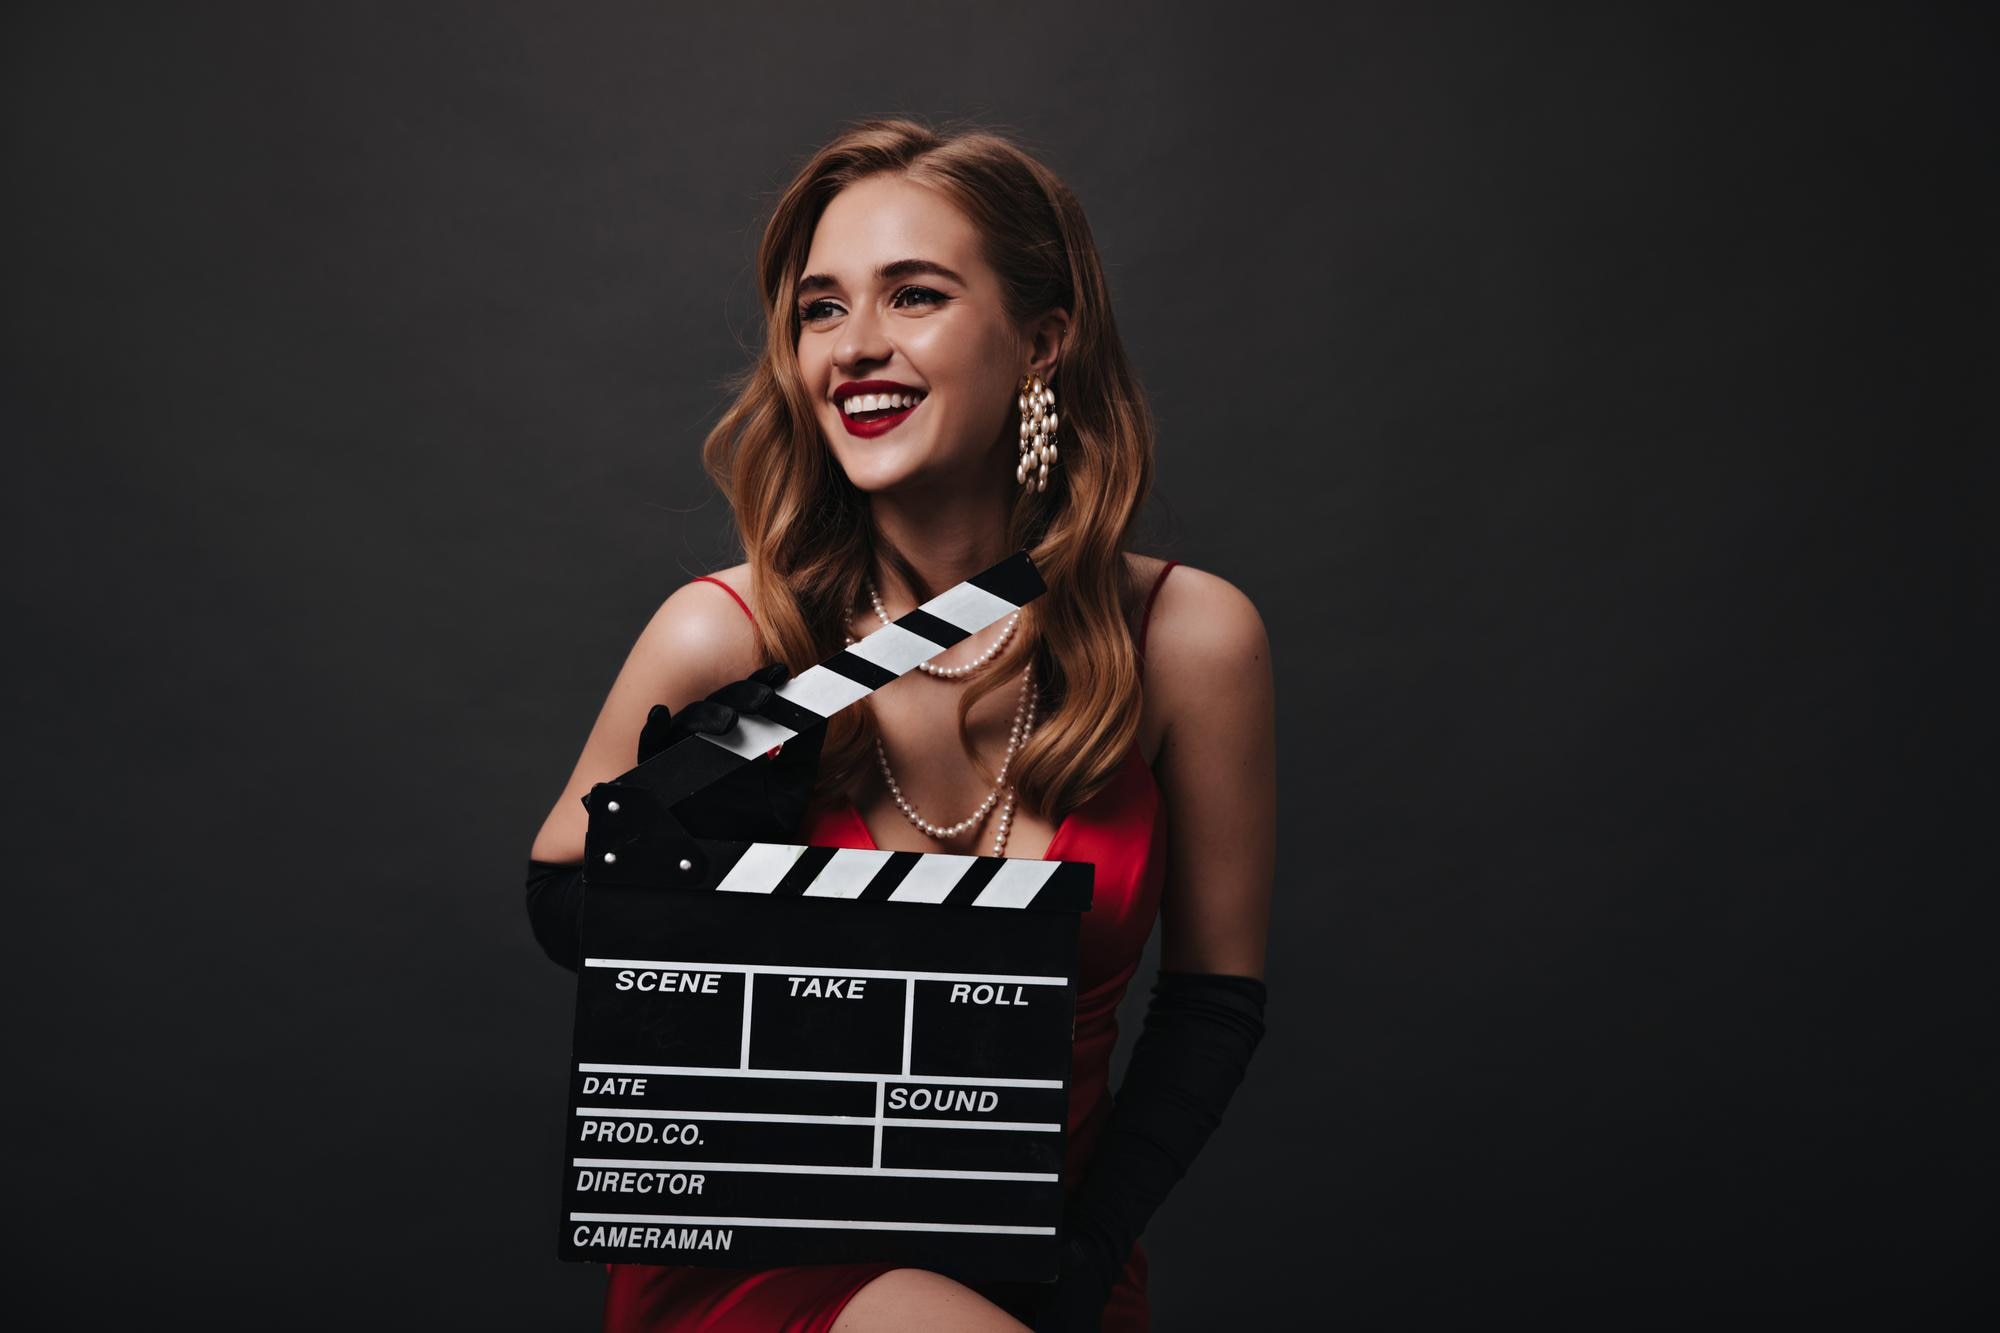 lady with red lips holding clapperboard black background happy woman luxury silk dress smiling posing isolated backdrop 197531 29121